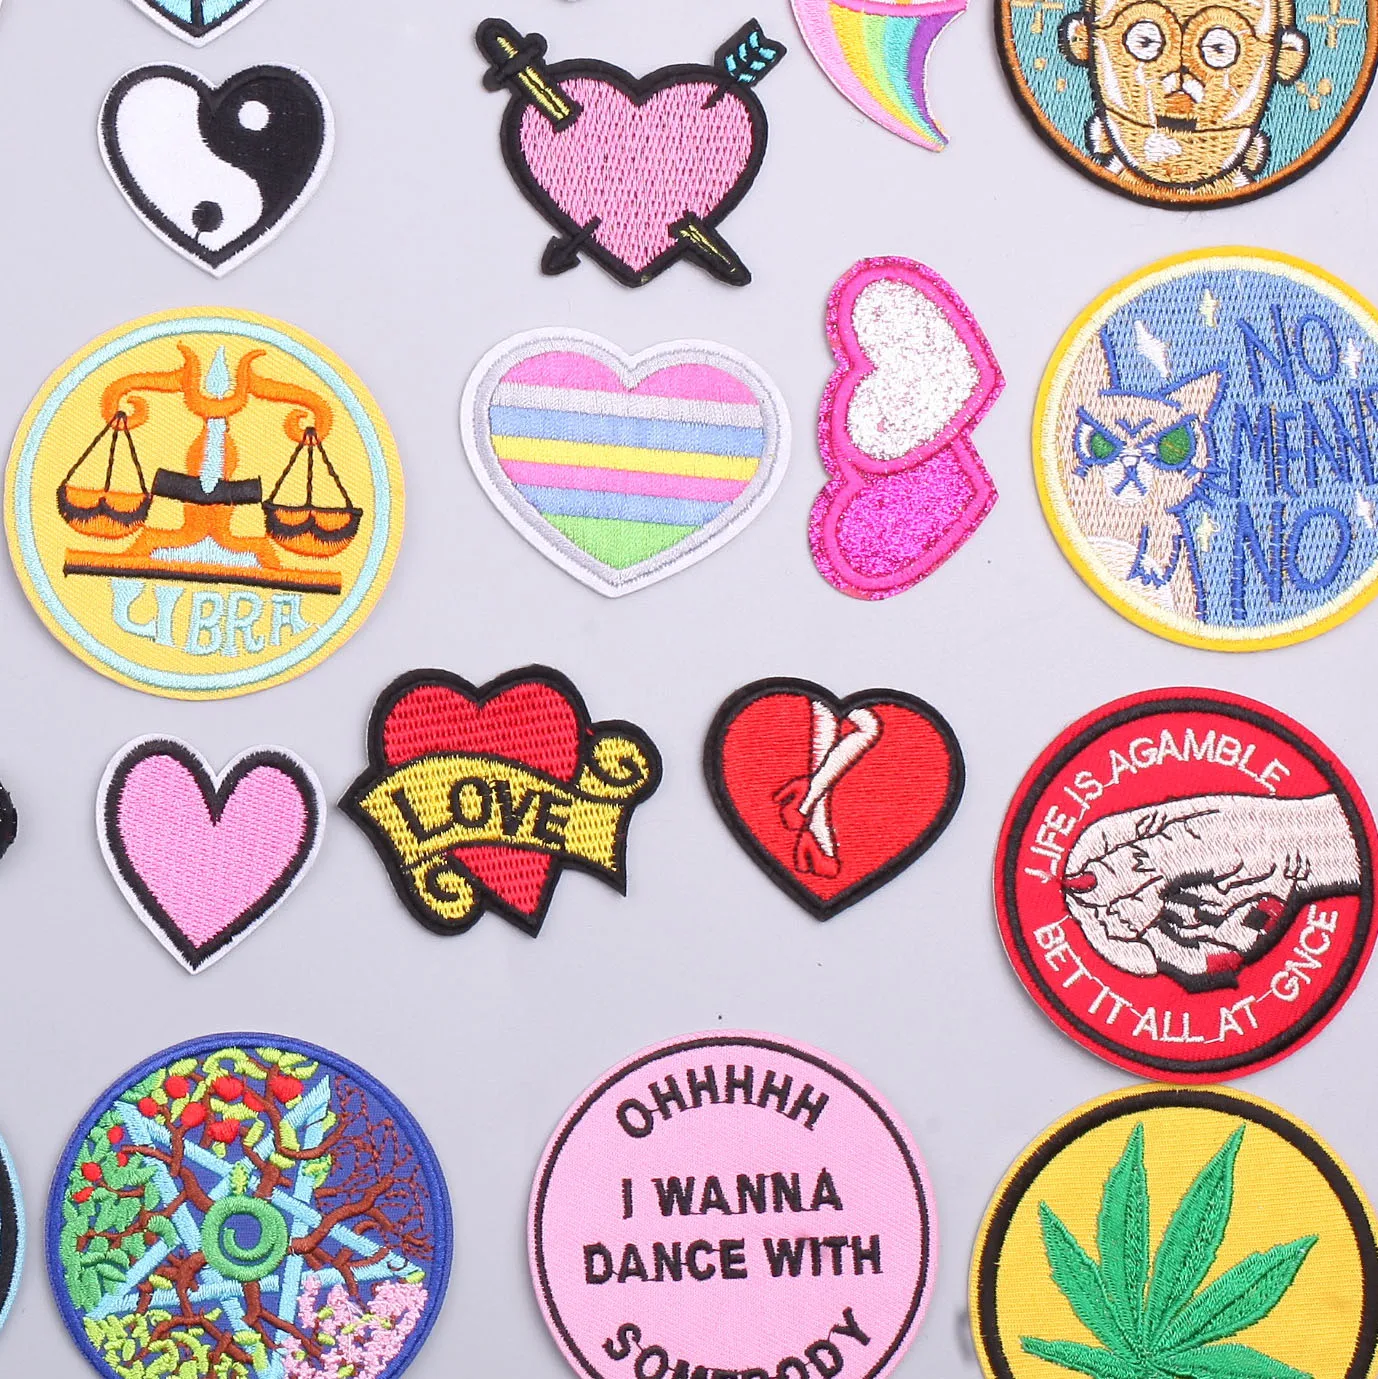 

Hippie Embroidery Patch Clothing Thermoadhesive Patches for Clothes Sewing Badges for T-shirts Appliques Sew on Iron on Patches